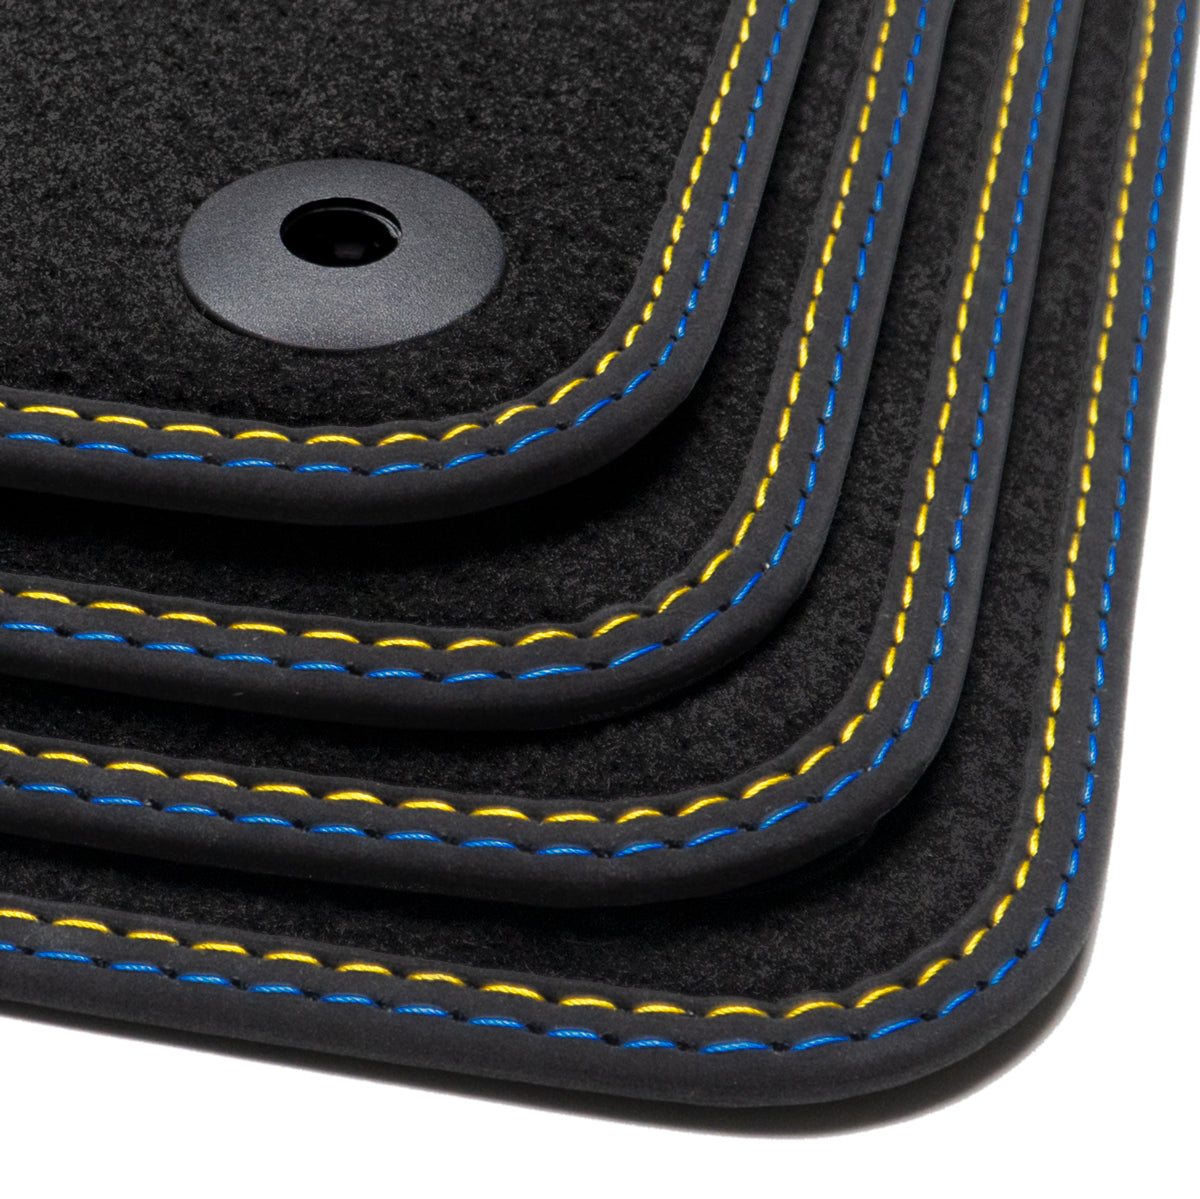 Volvo C70 Floor Mats - First Generation Coupe and Convertible - Sport Stitching